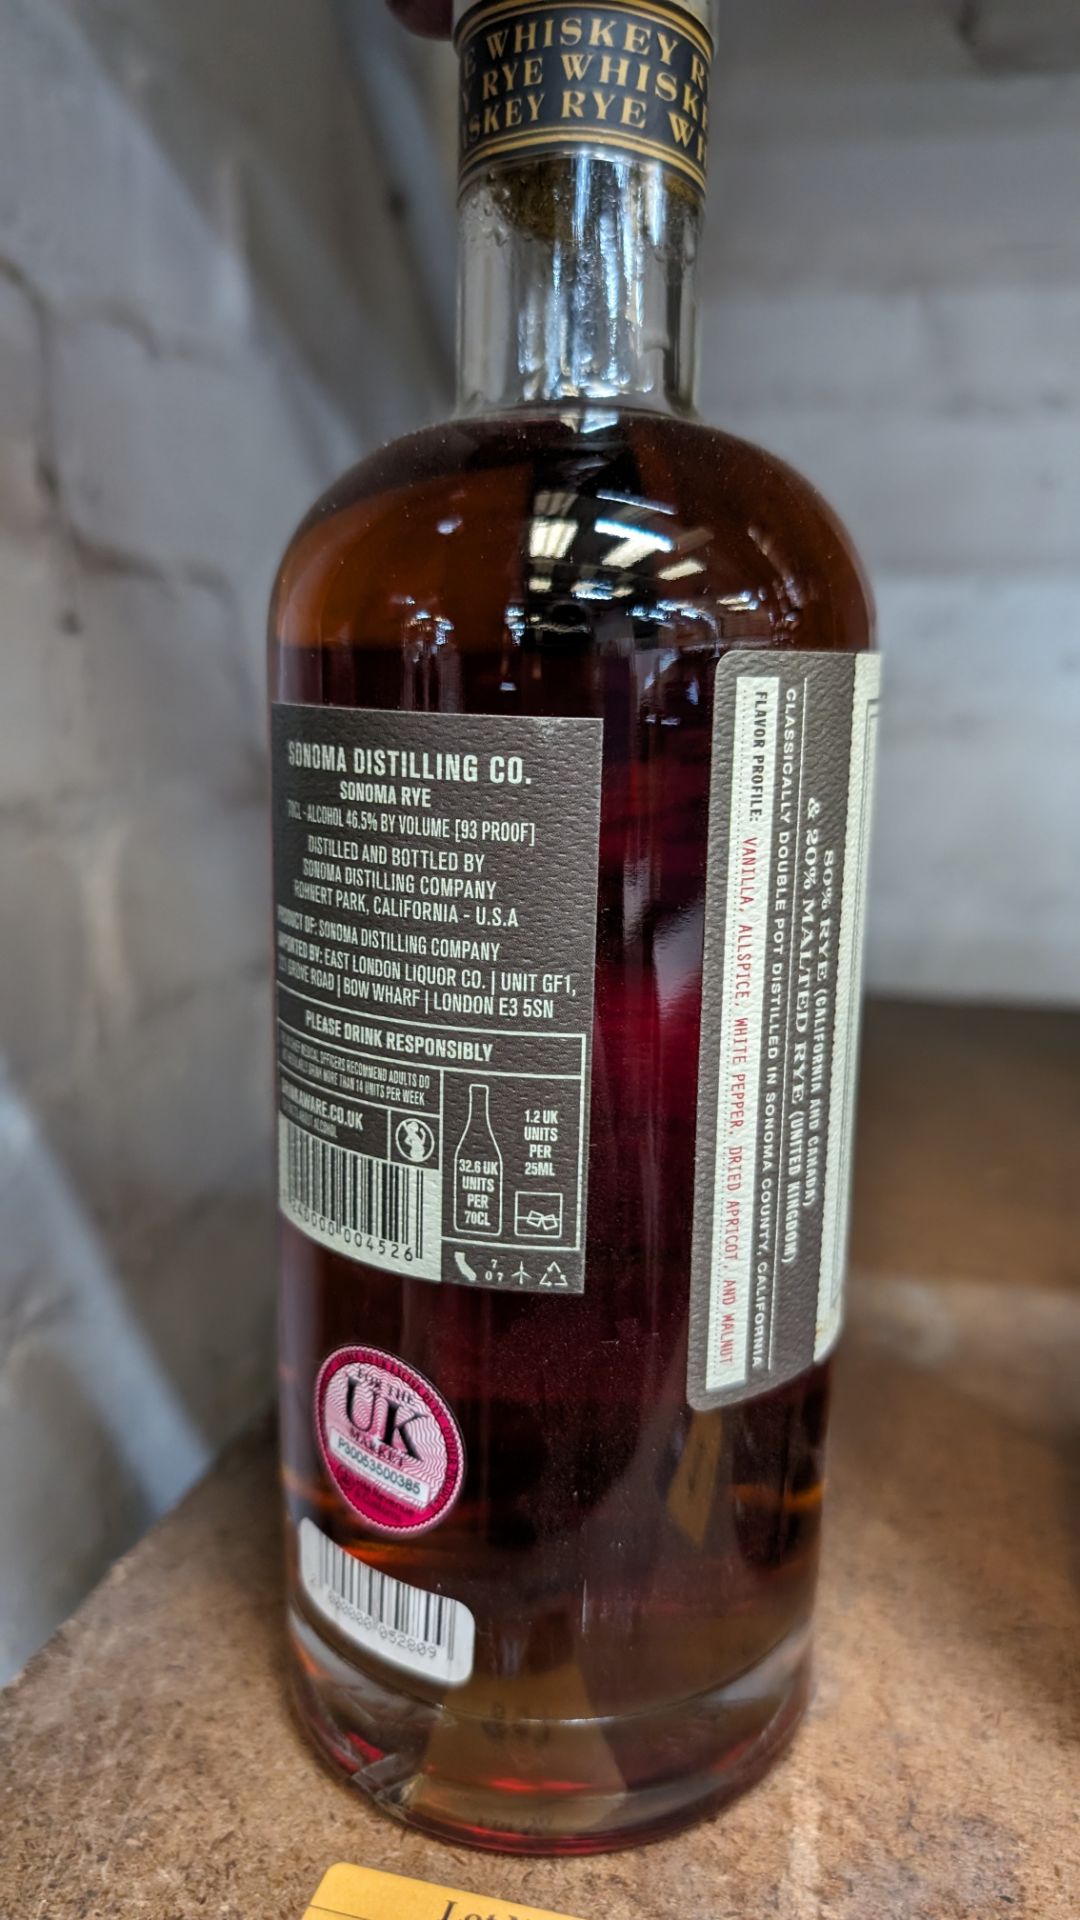 1 off 700ml bottle of Sonoma Rye Whiskey. 46.5% alc/vol (93 proof). Distilled and bottled in Sonom - Image 5 of 8